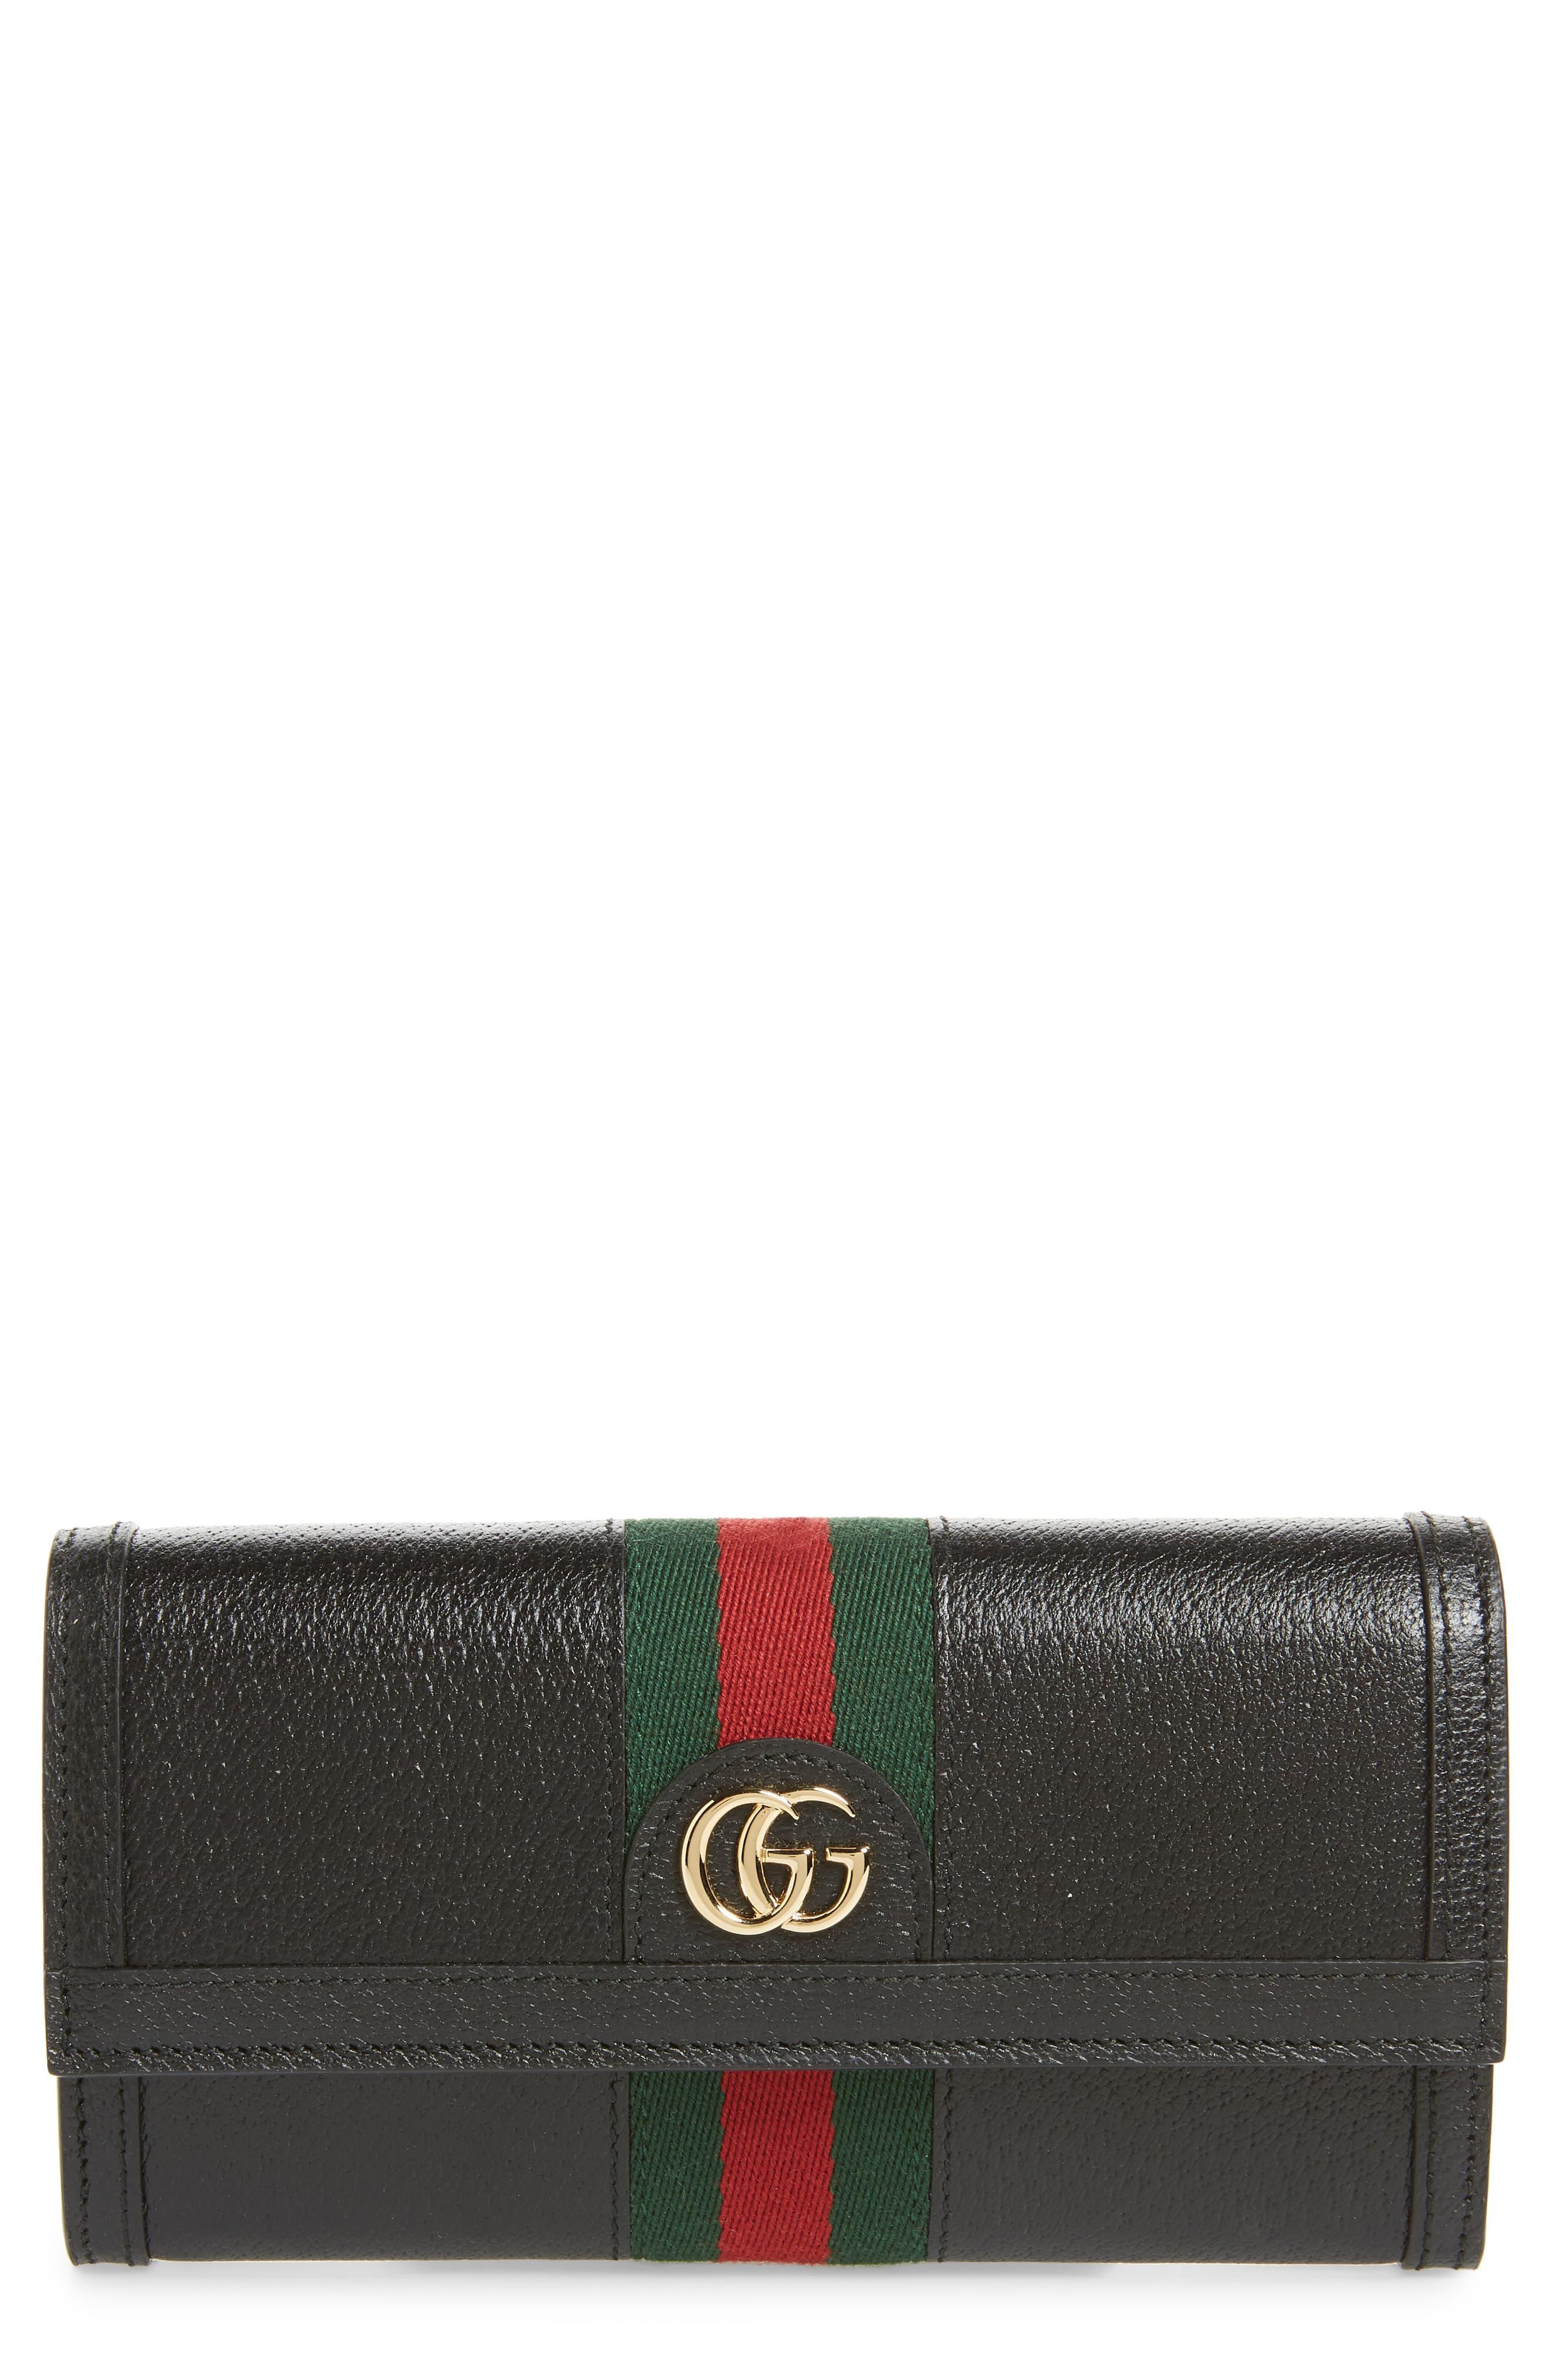 gucci ophidia continental wallet